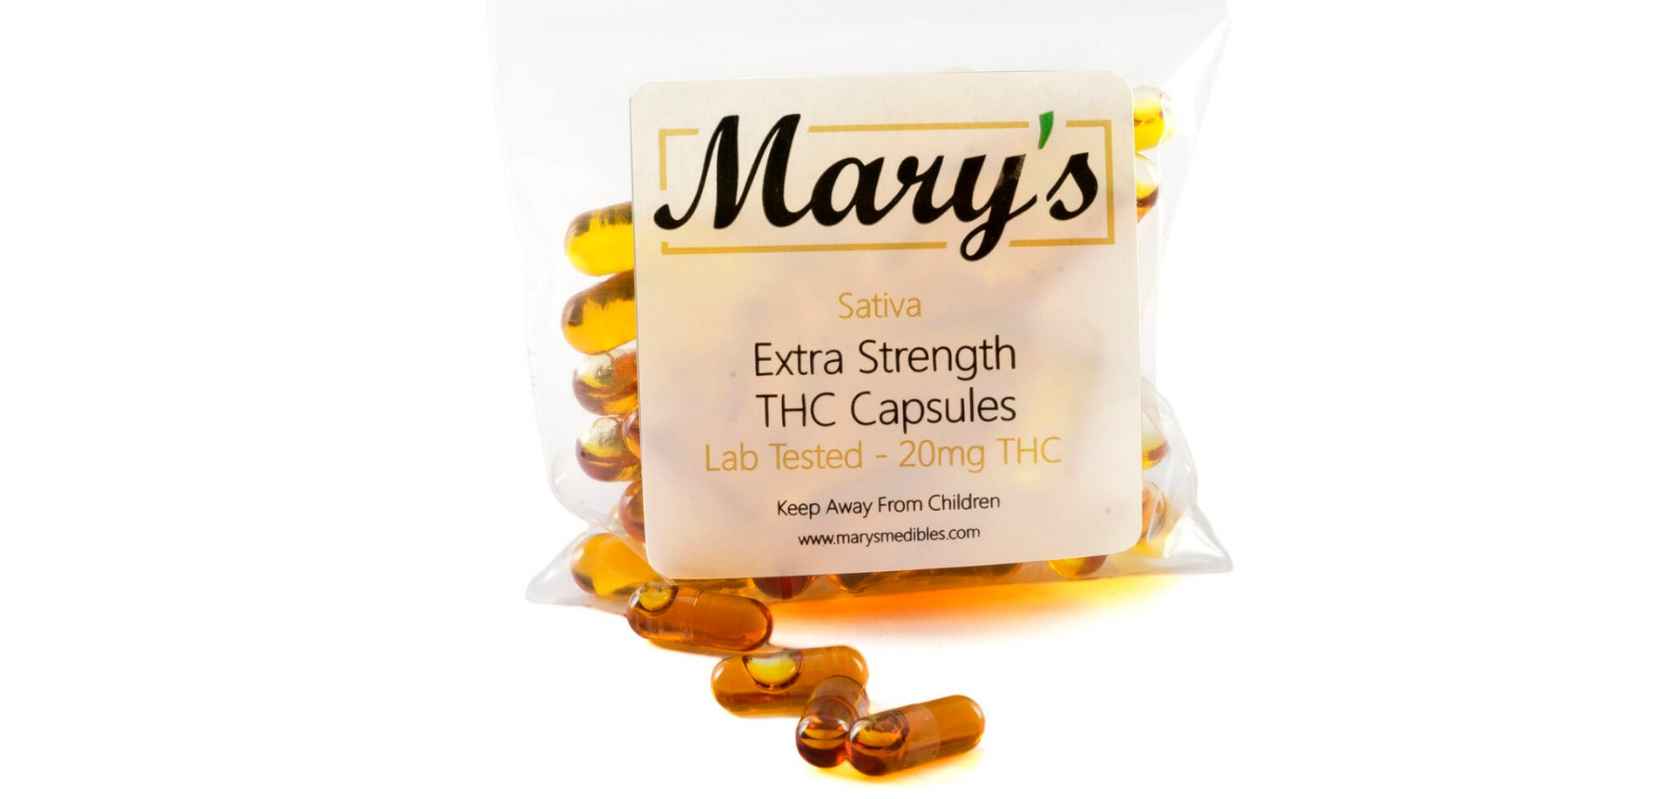 Mary's Medibles Sativa Capsules are a great way to get the benefits of medical marijuana without smoking it.  